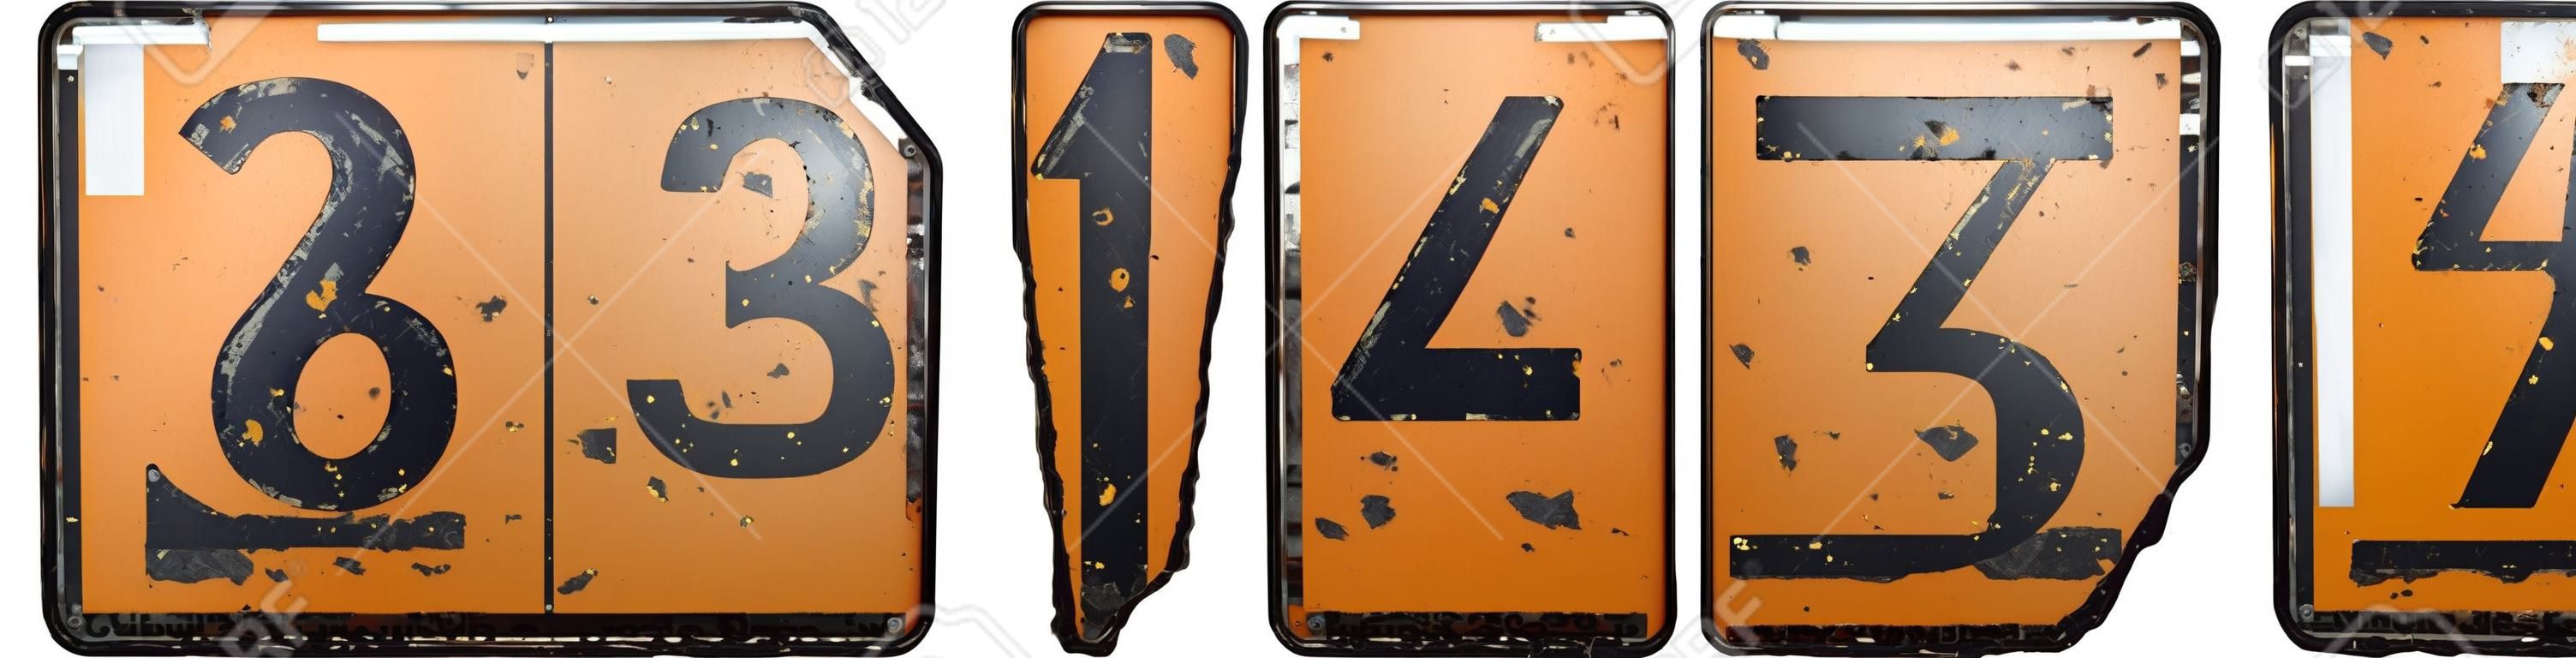 Set of numbers 2, 3, 4, 5 made of public road sign orange and black color on white background. 3d rendering